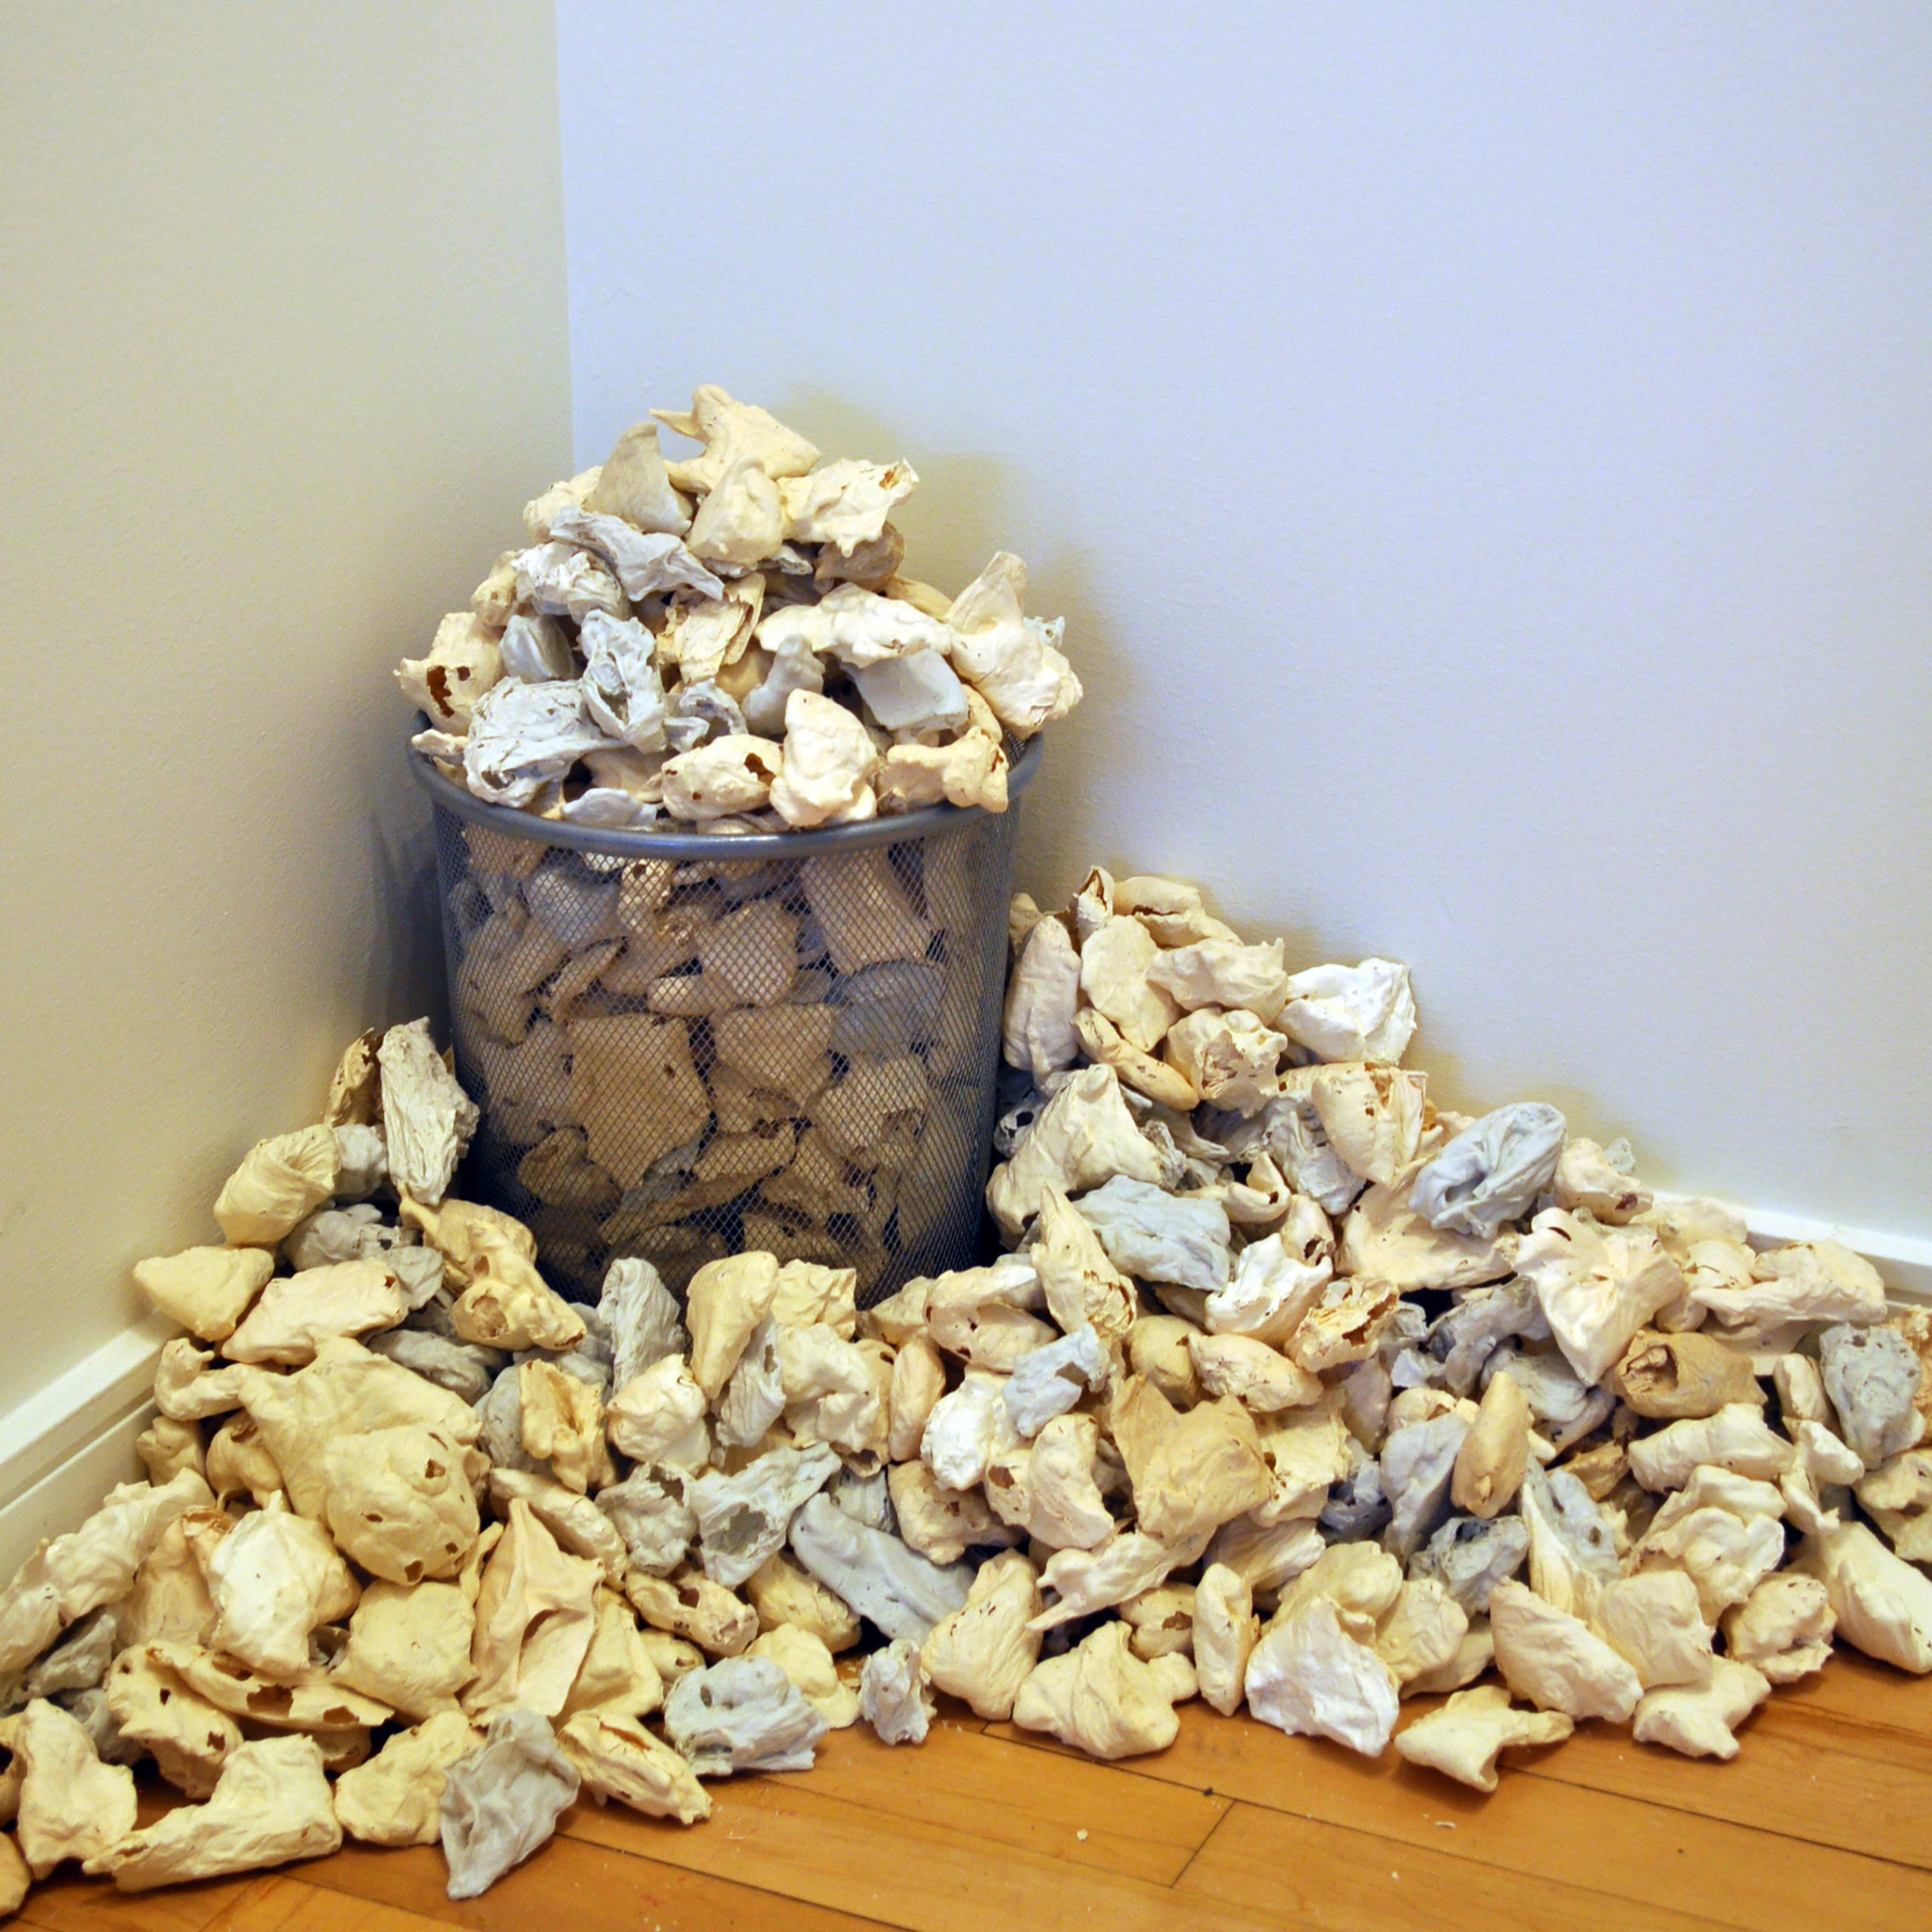 A photograph depicting a wire wastebasket in the corner of a room, overflowing with crumpled tissues covered in a smooth, hard yellowish or grayish substance.